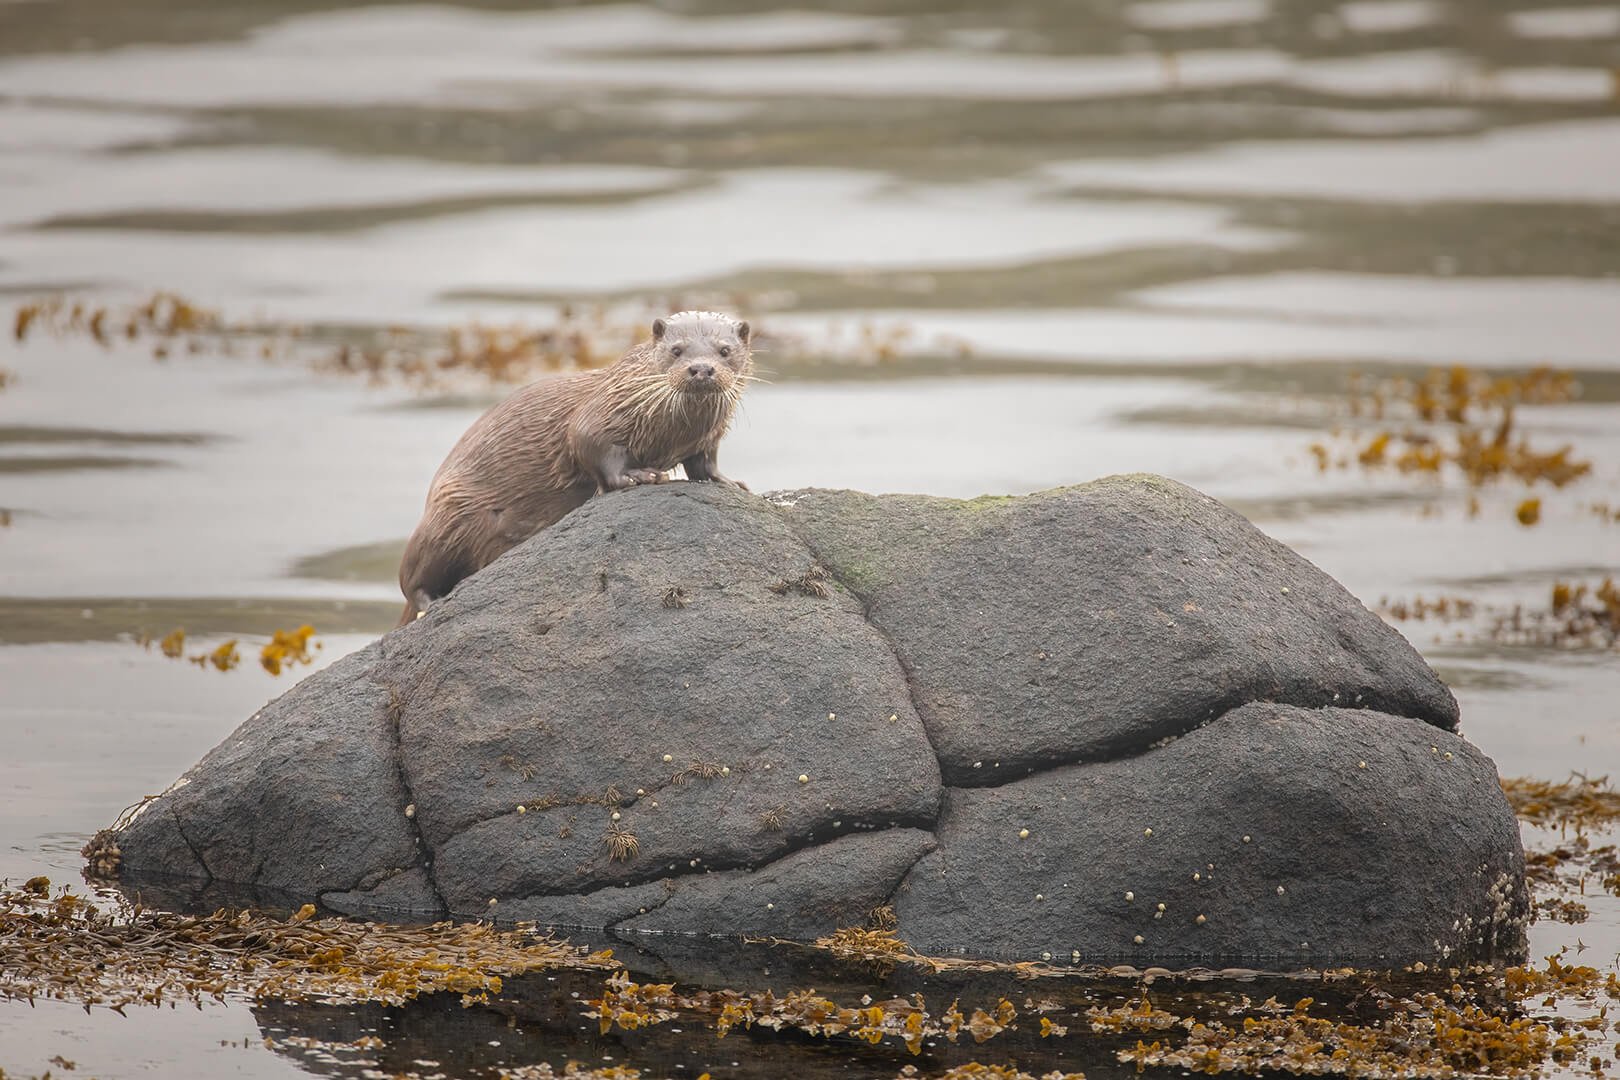 Otter on rock photographed on Natural World Photography Otters and Eagles wildlife photography tour to Mull